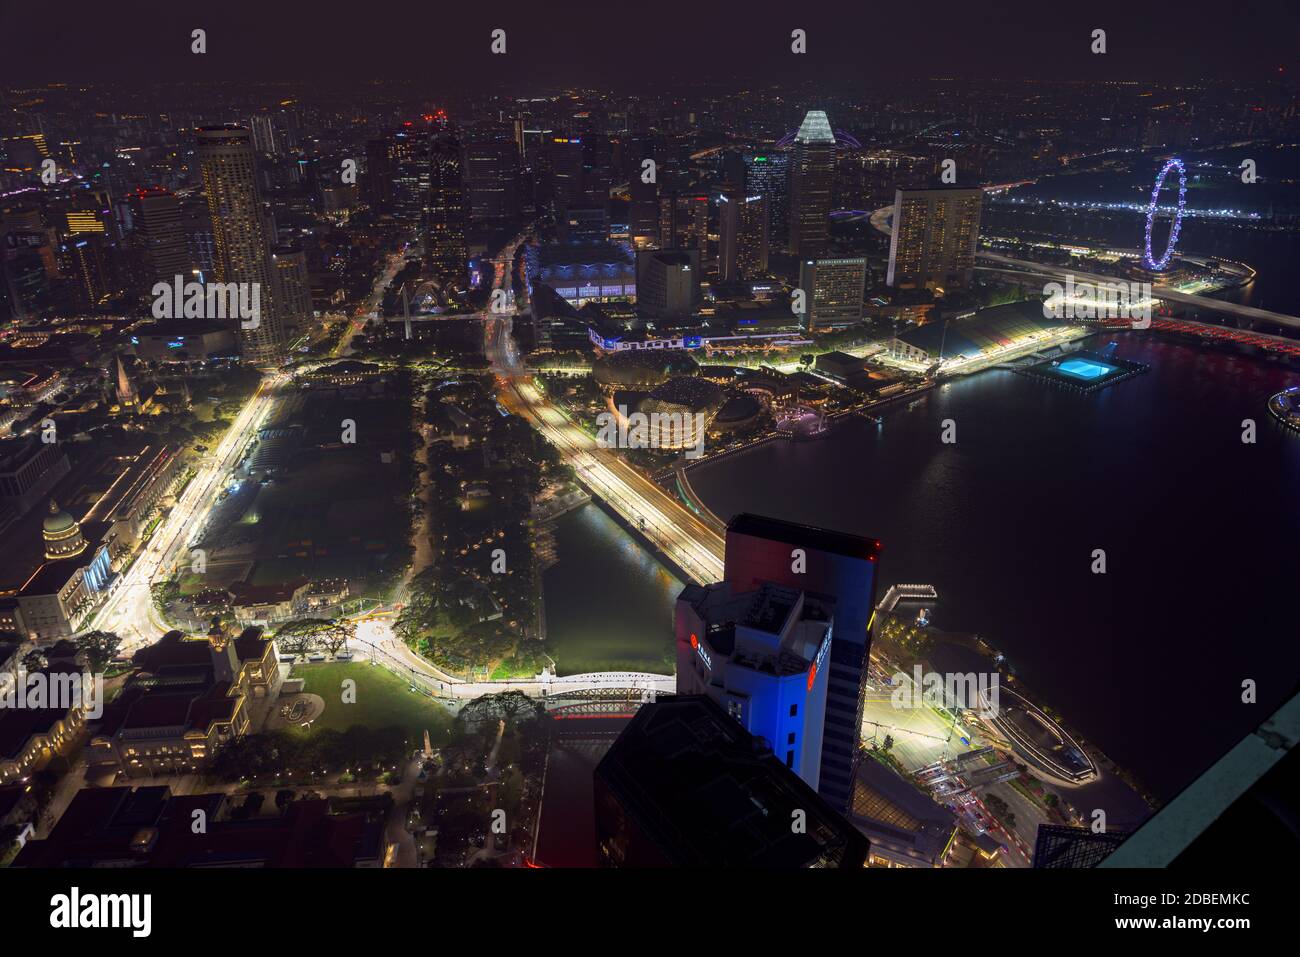 Singapore - 6 Sep 2019: Aerial view of Singapore Formula One Street circuit around Marina Bay and the Central Business District, illuminated at night Stock Photo